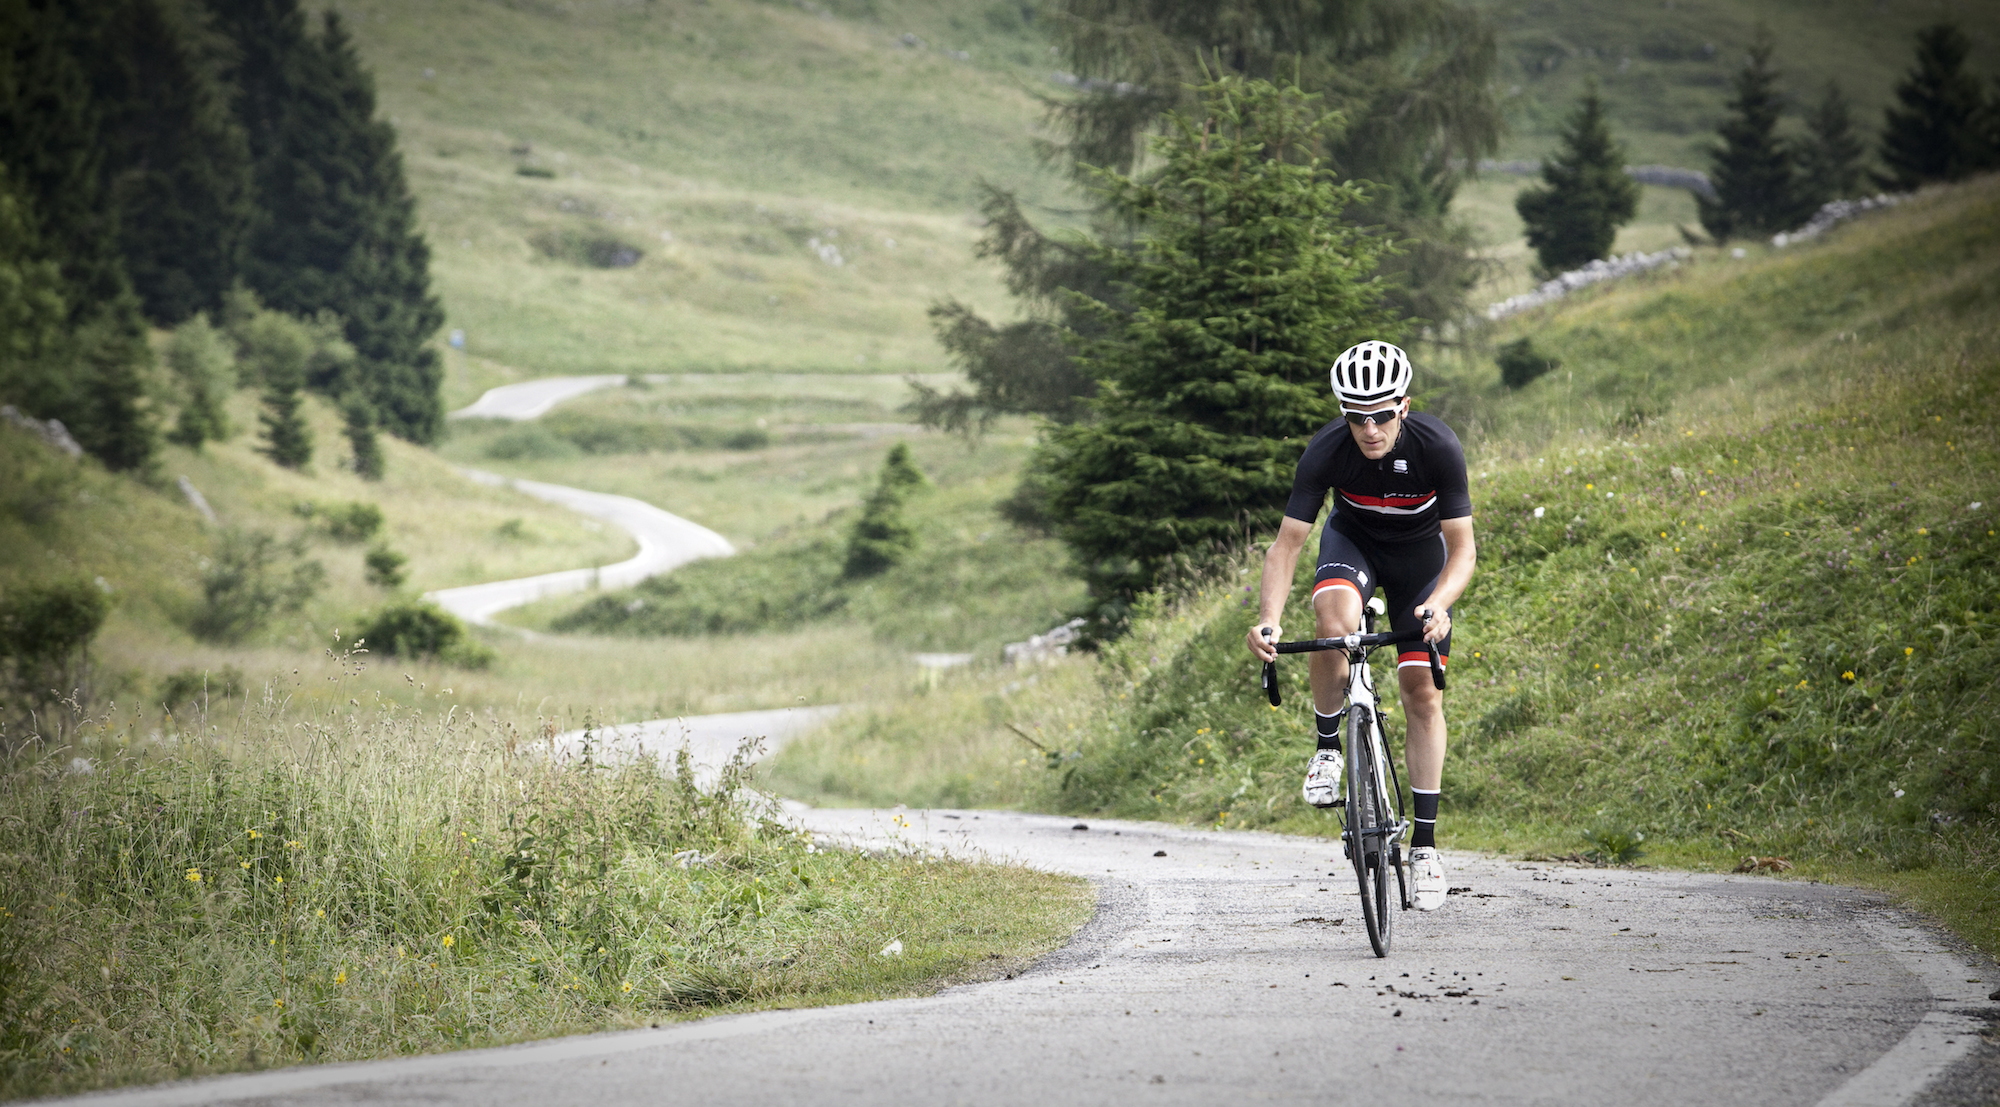 The iconic Monte Grappa is on Sportful's doorstep